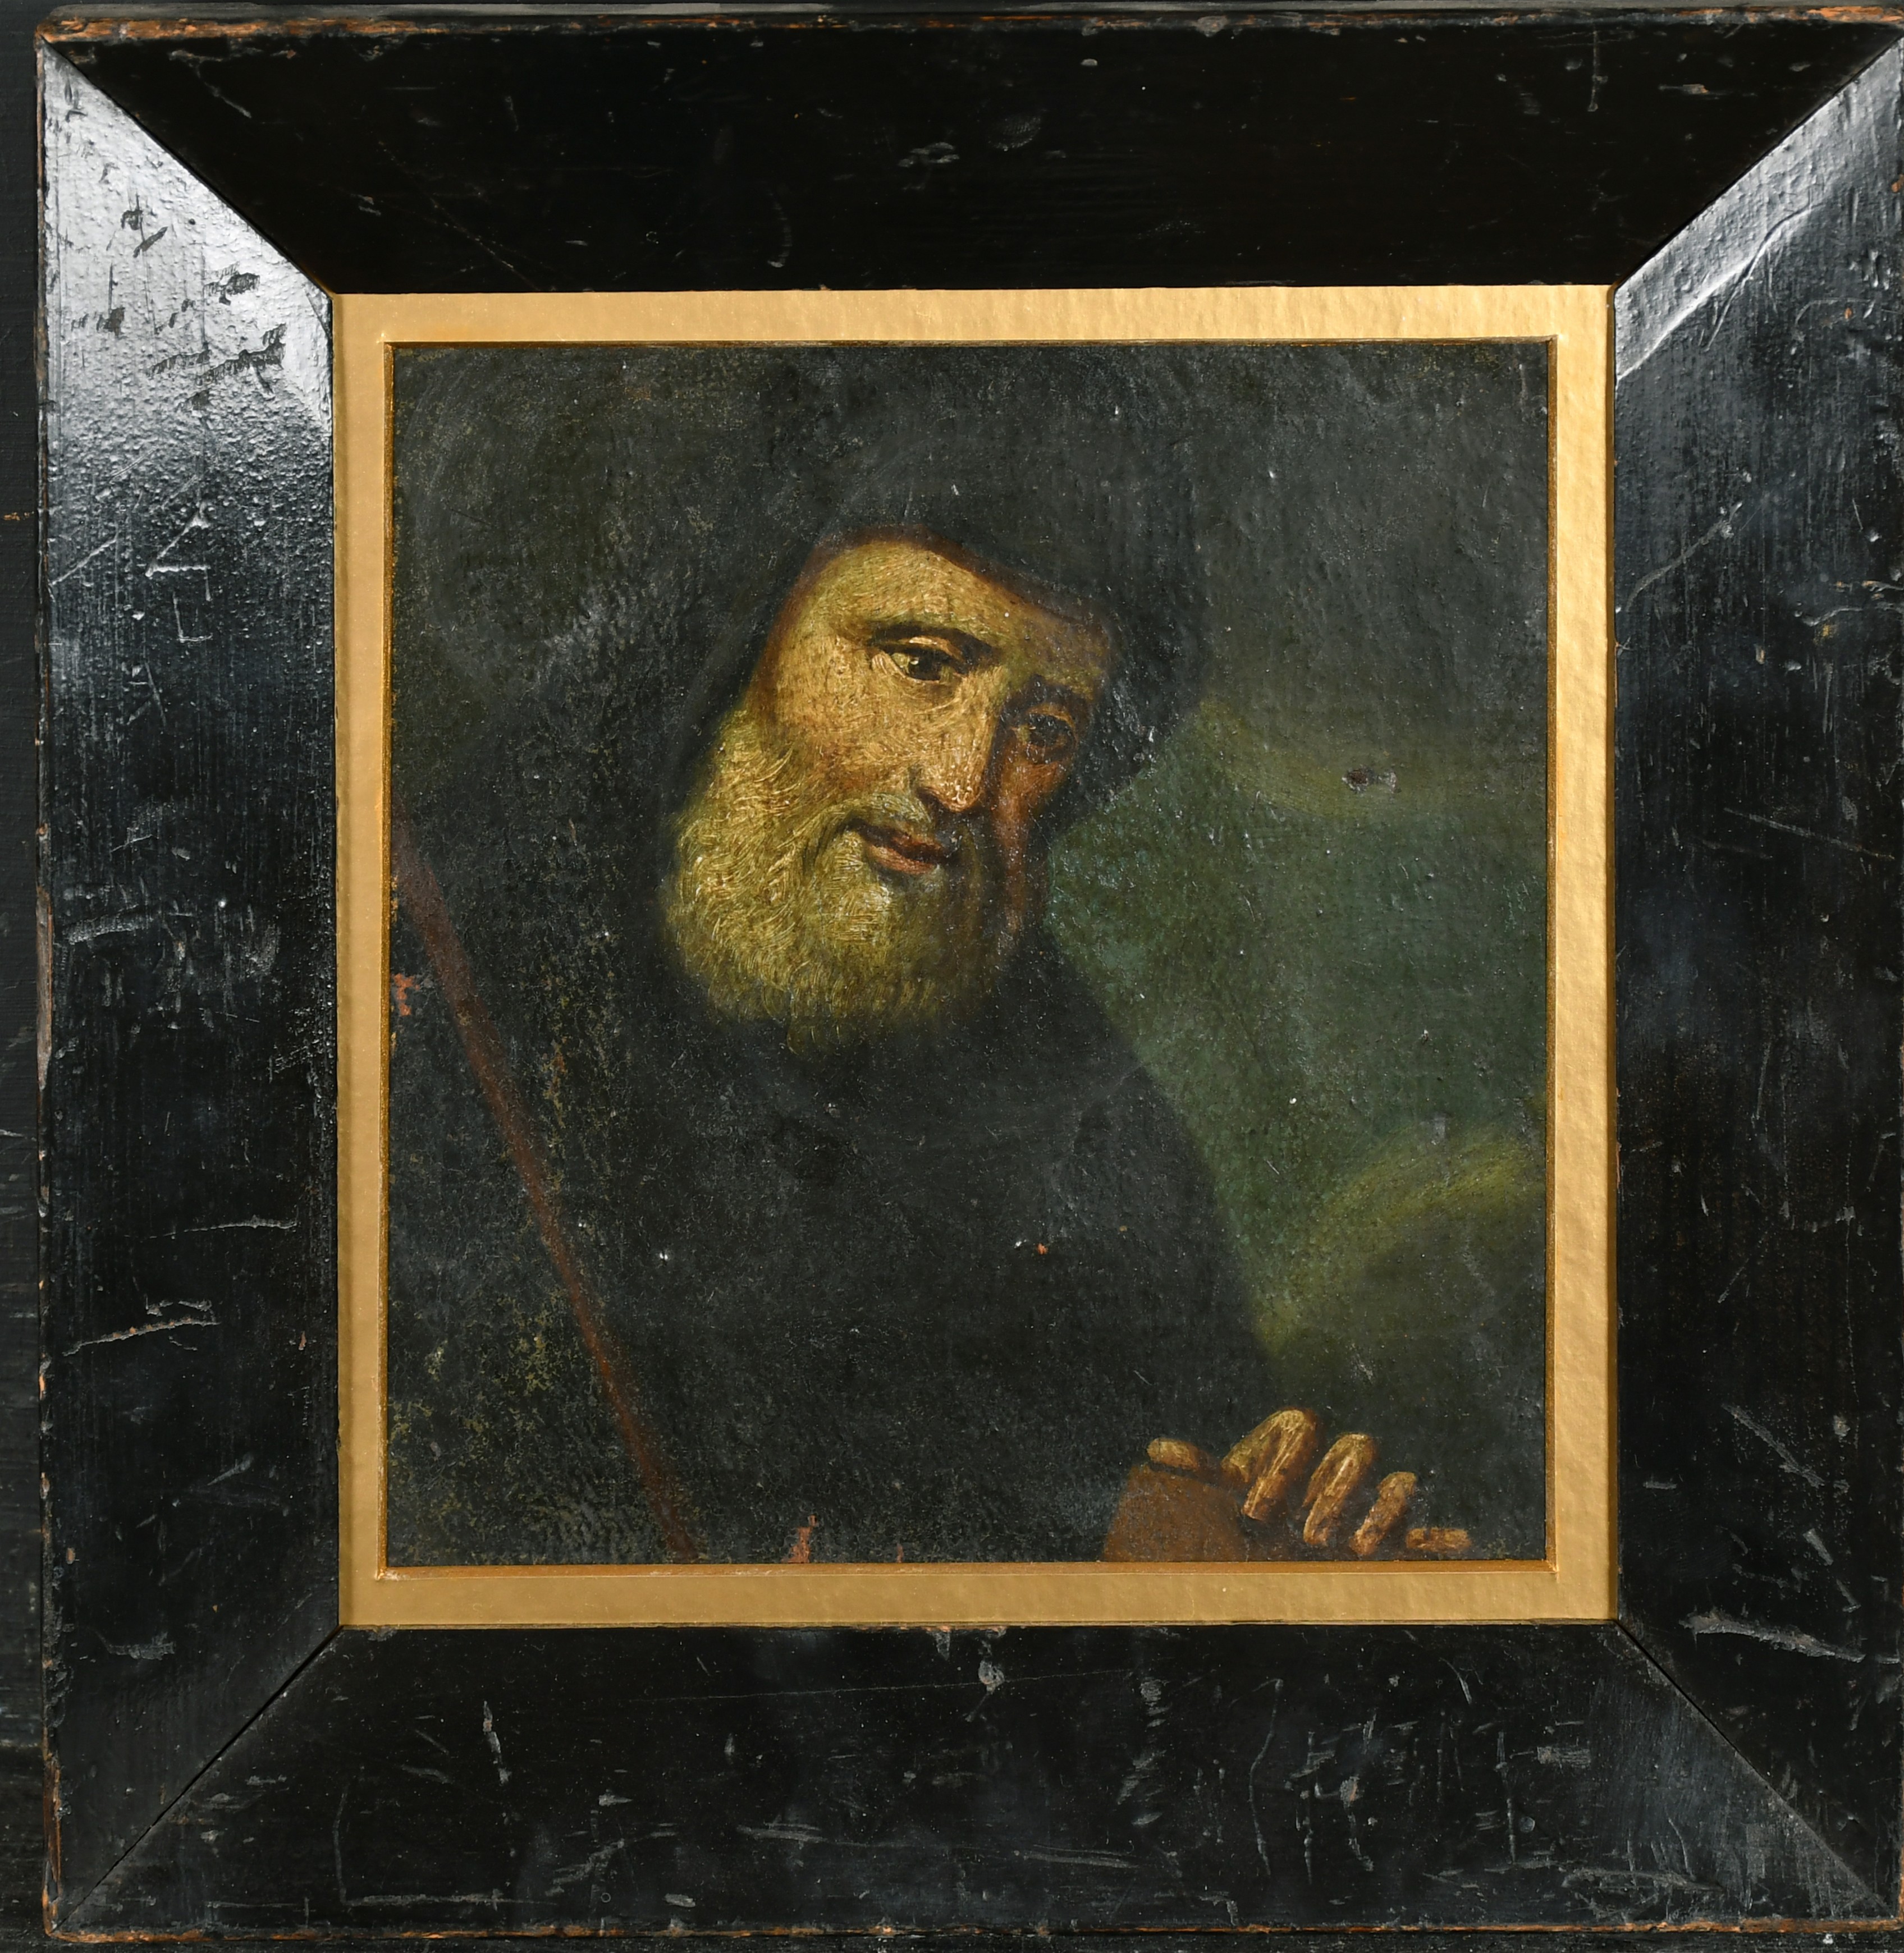 17th Century Italian School. Study of a Priest, Oil on canvas, a fragment, 8.25" x 7.75" (21 x 19. - Image 2 of 3